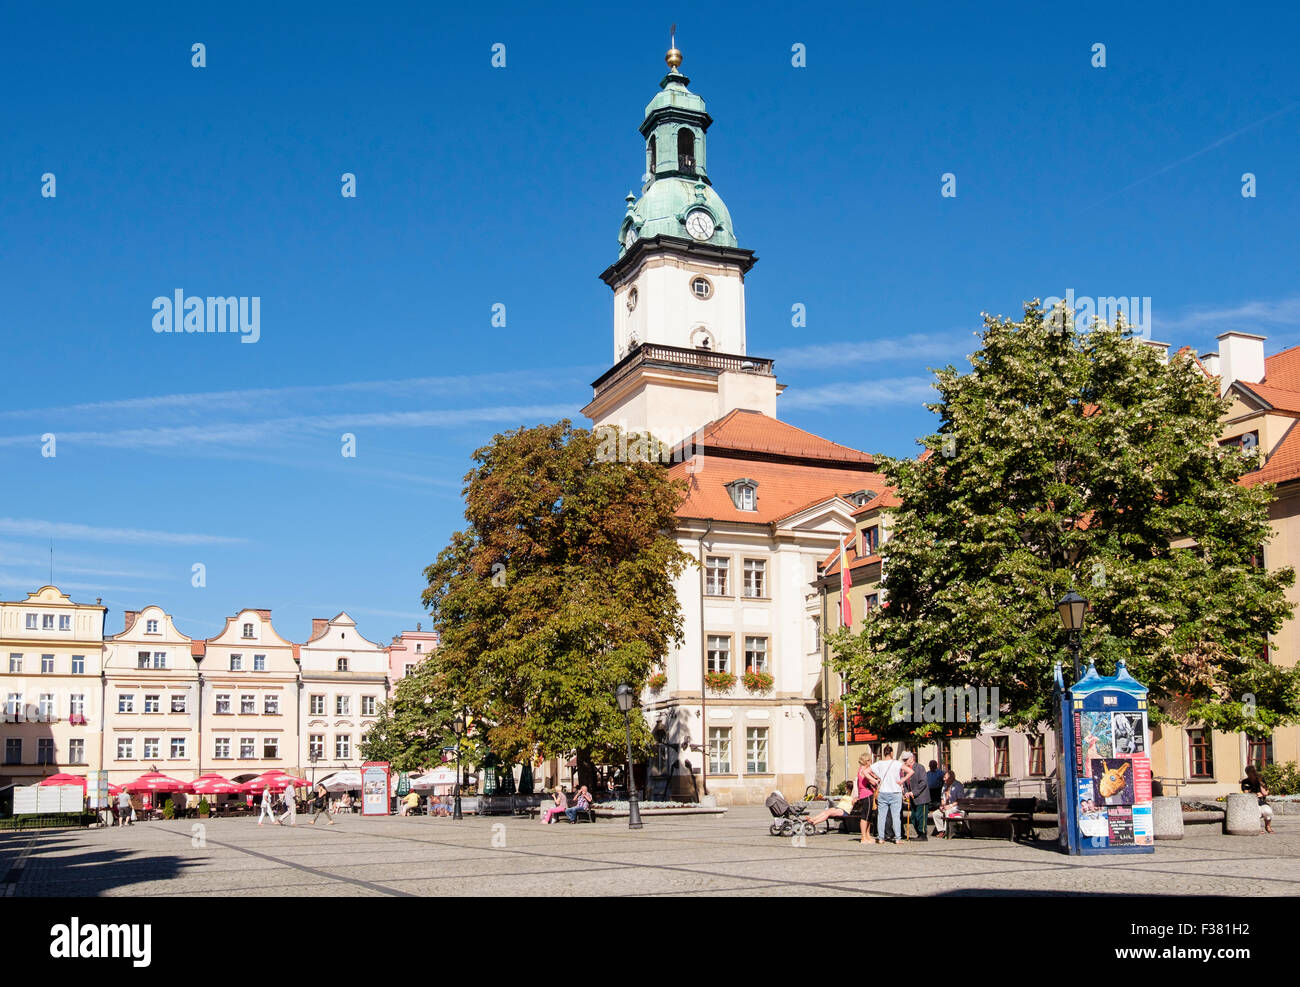 18th century Townhall building and former merchants houses in Town Hall Square, Jelenia Gora or Hirschberg Lower Silesia Poland Stock Photo